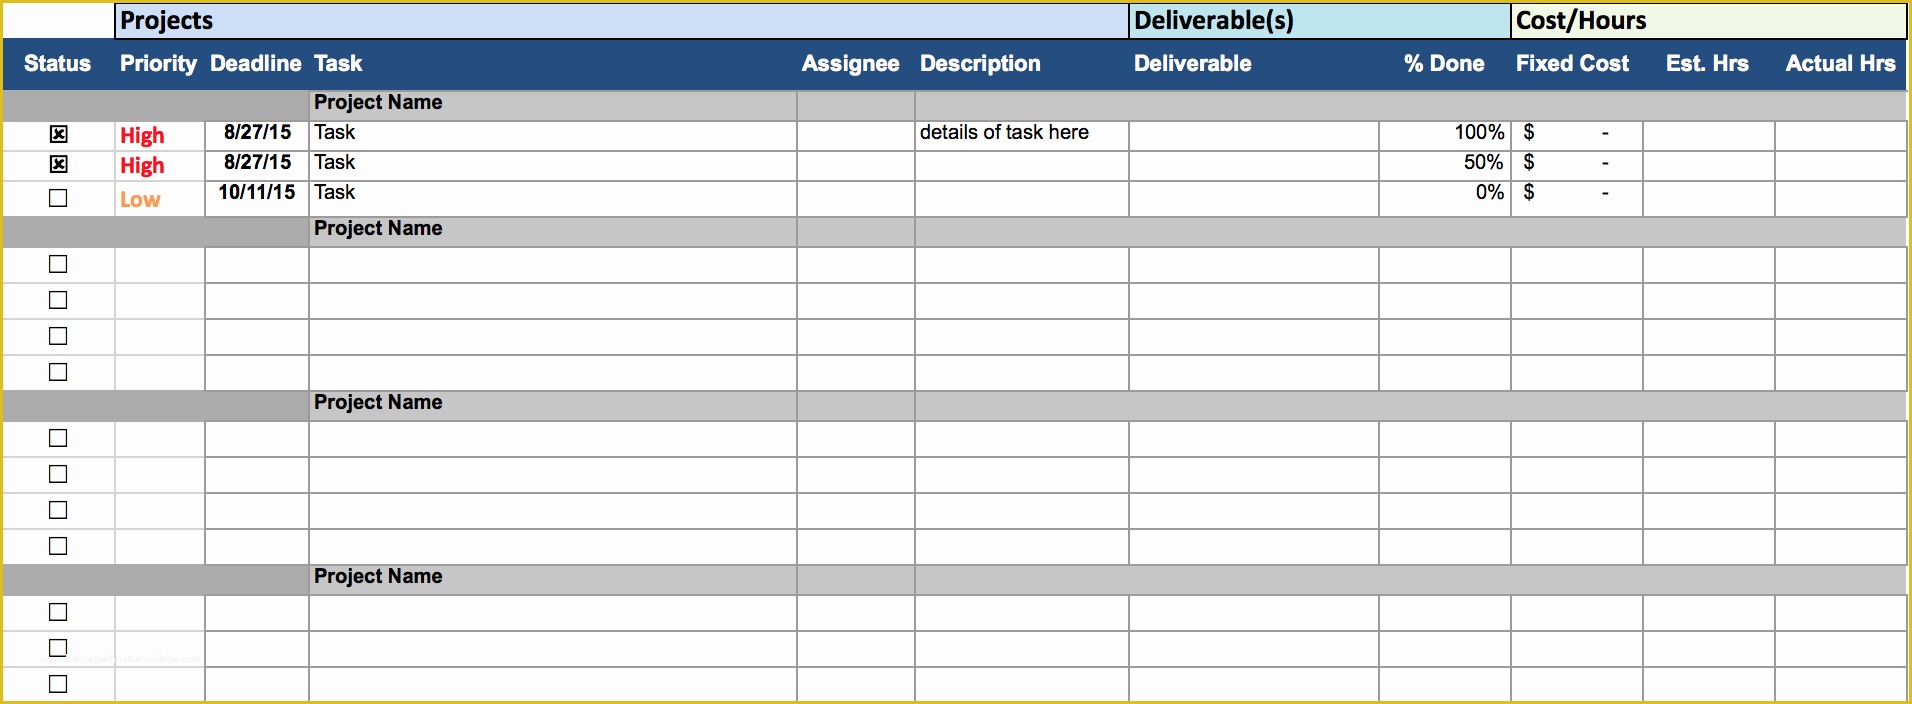 Multiple Project Tracking Template Excel Free Download Of Multiple Project Tracking Template Excel